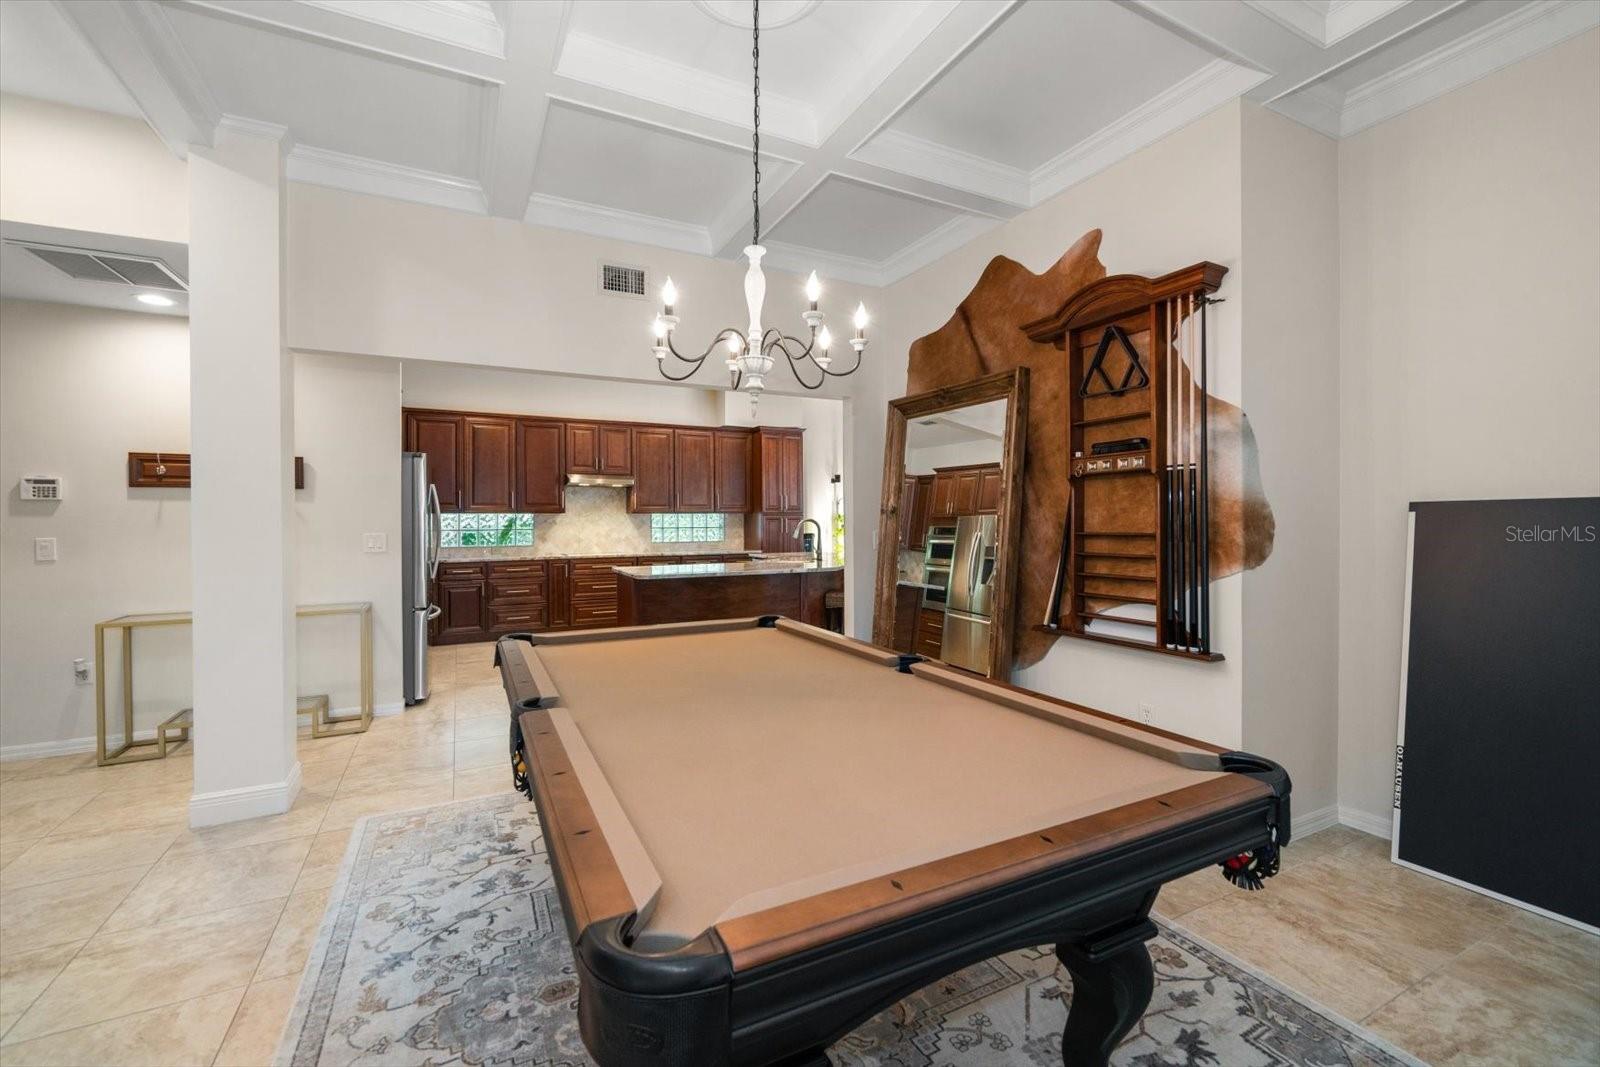 Dining room or game room area